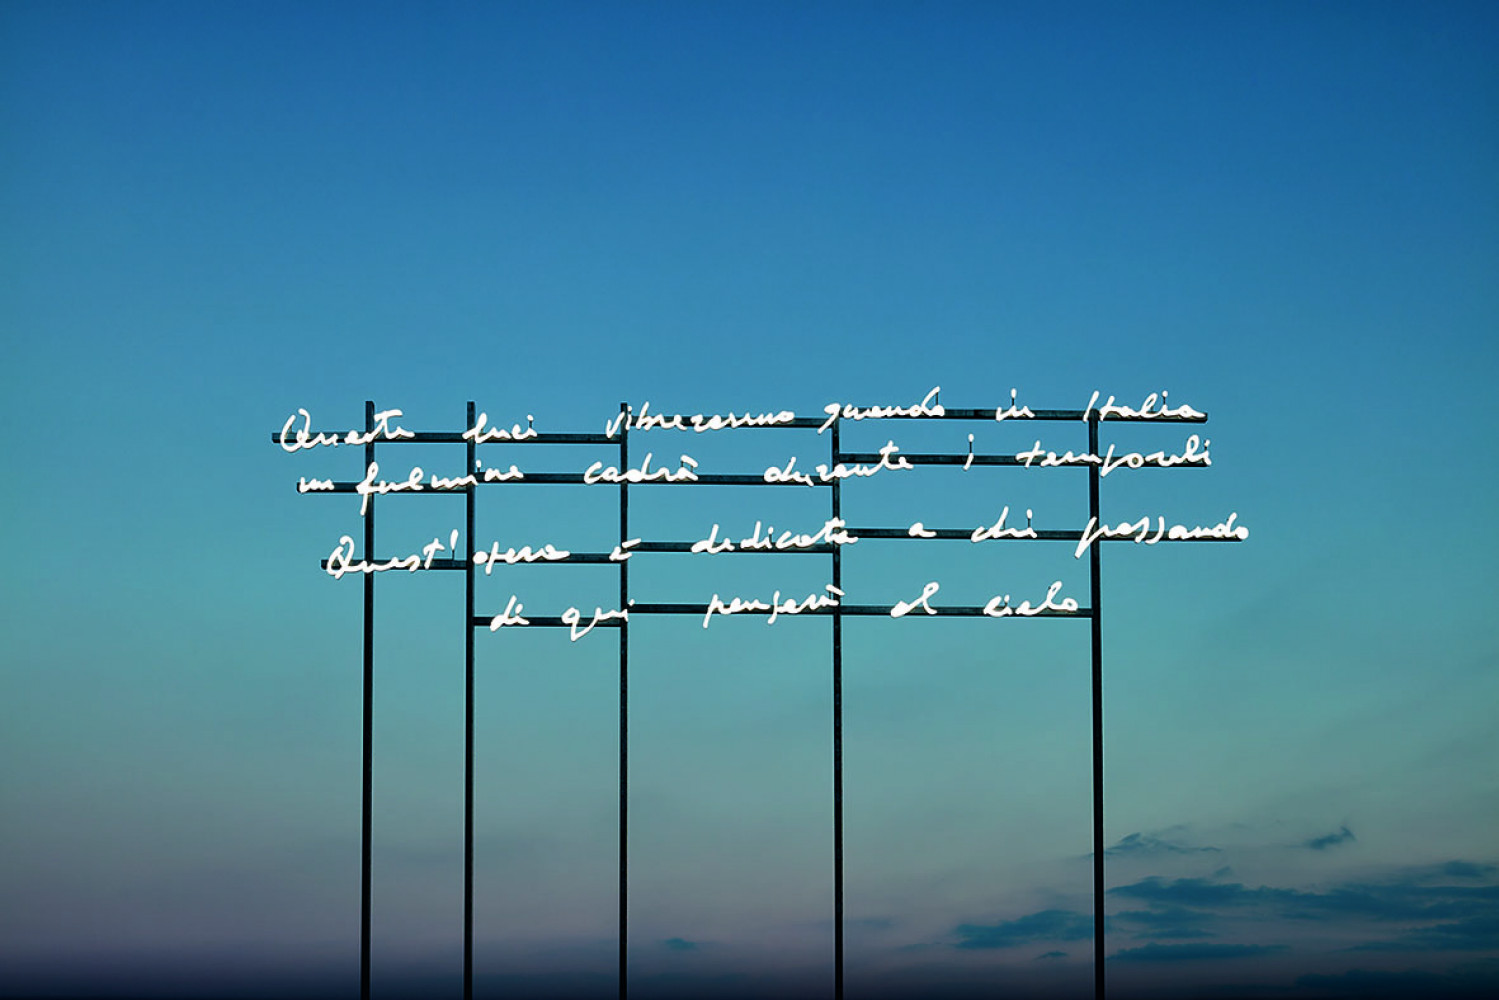 Alberto Garutti, ‘These lights will vibrate whenever lightning strikes in Italy during thunderstorms. This work is dedicated to anyone passing by who will think of the sky’, 2019